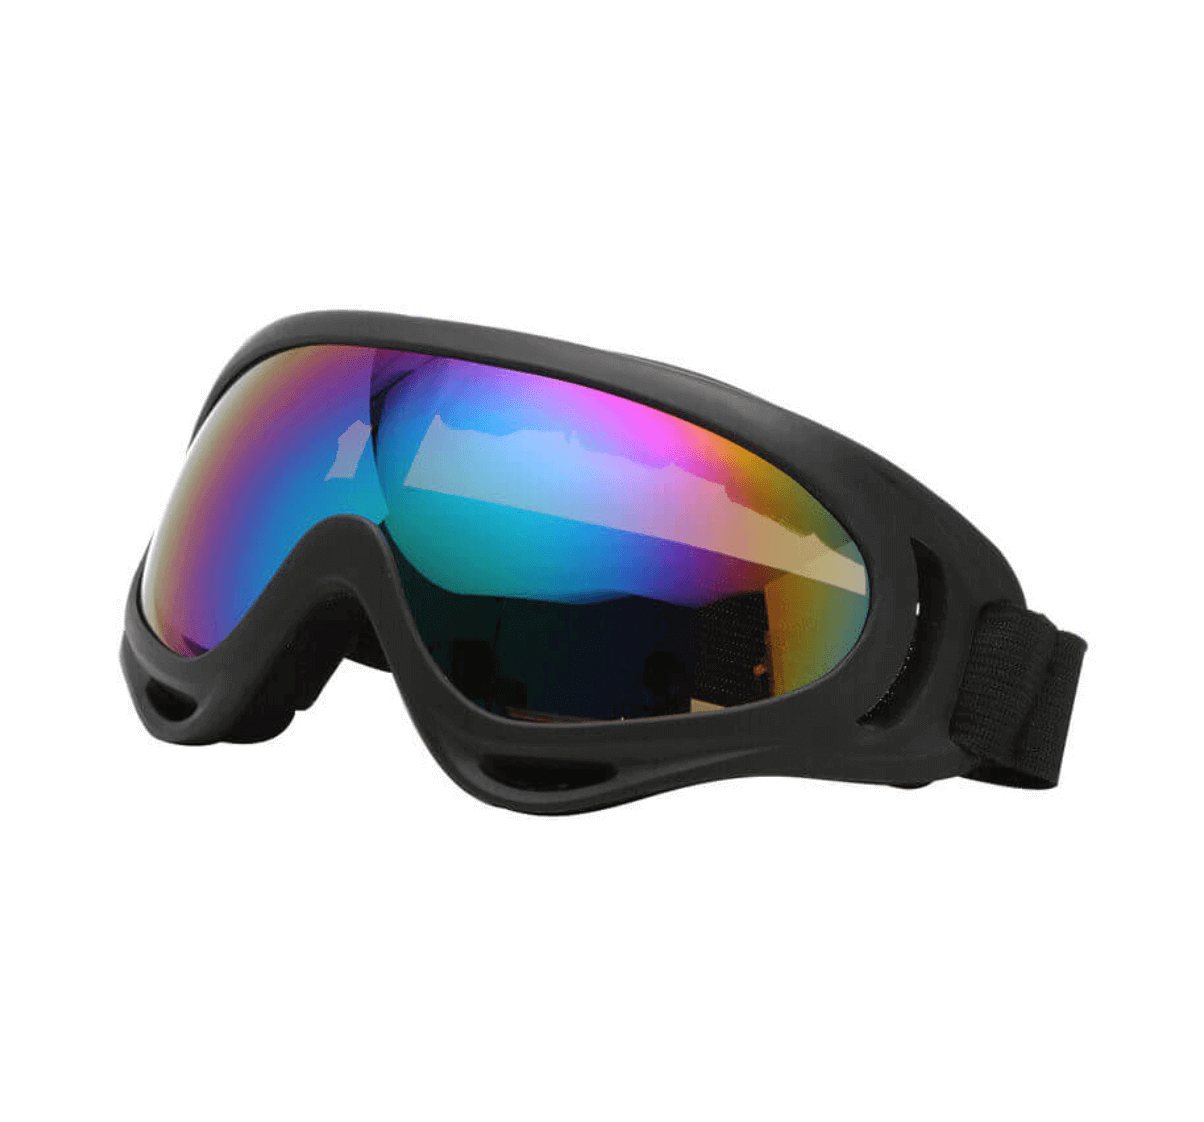 Wholesale Ski Goggles from China Sunglasses Manufacturer and Supplier